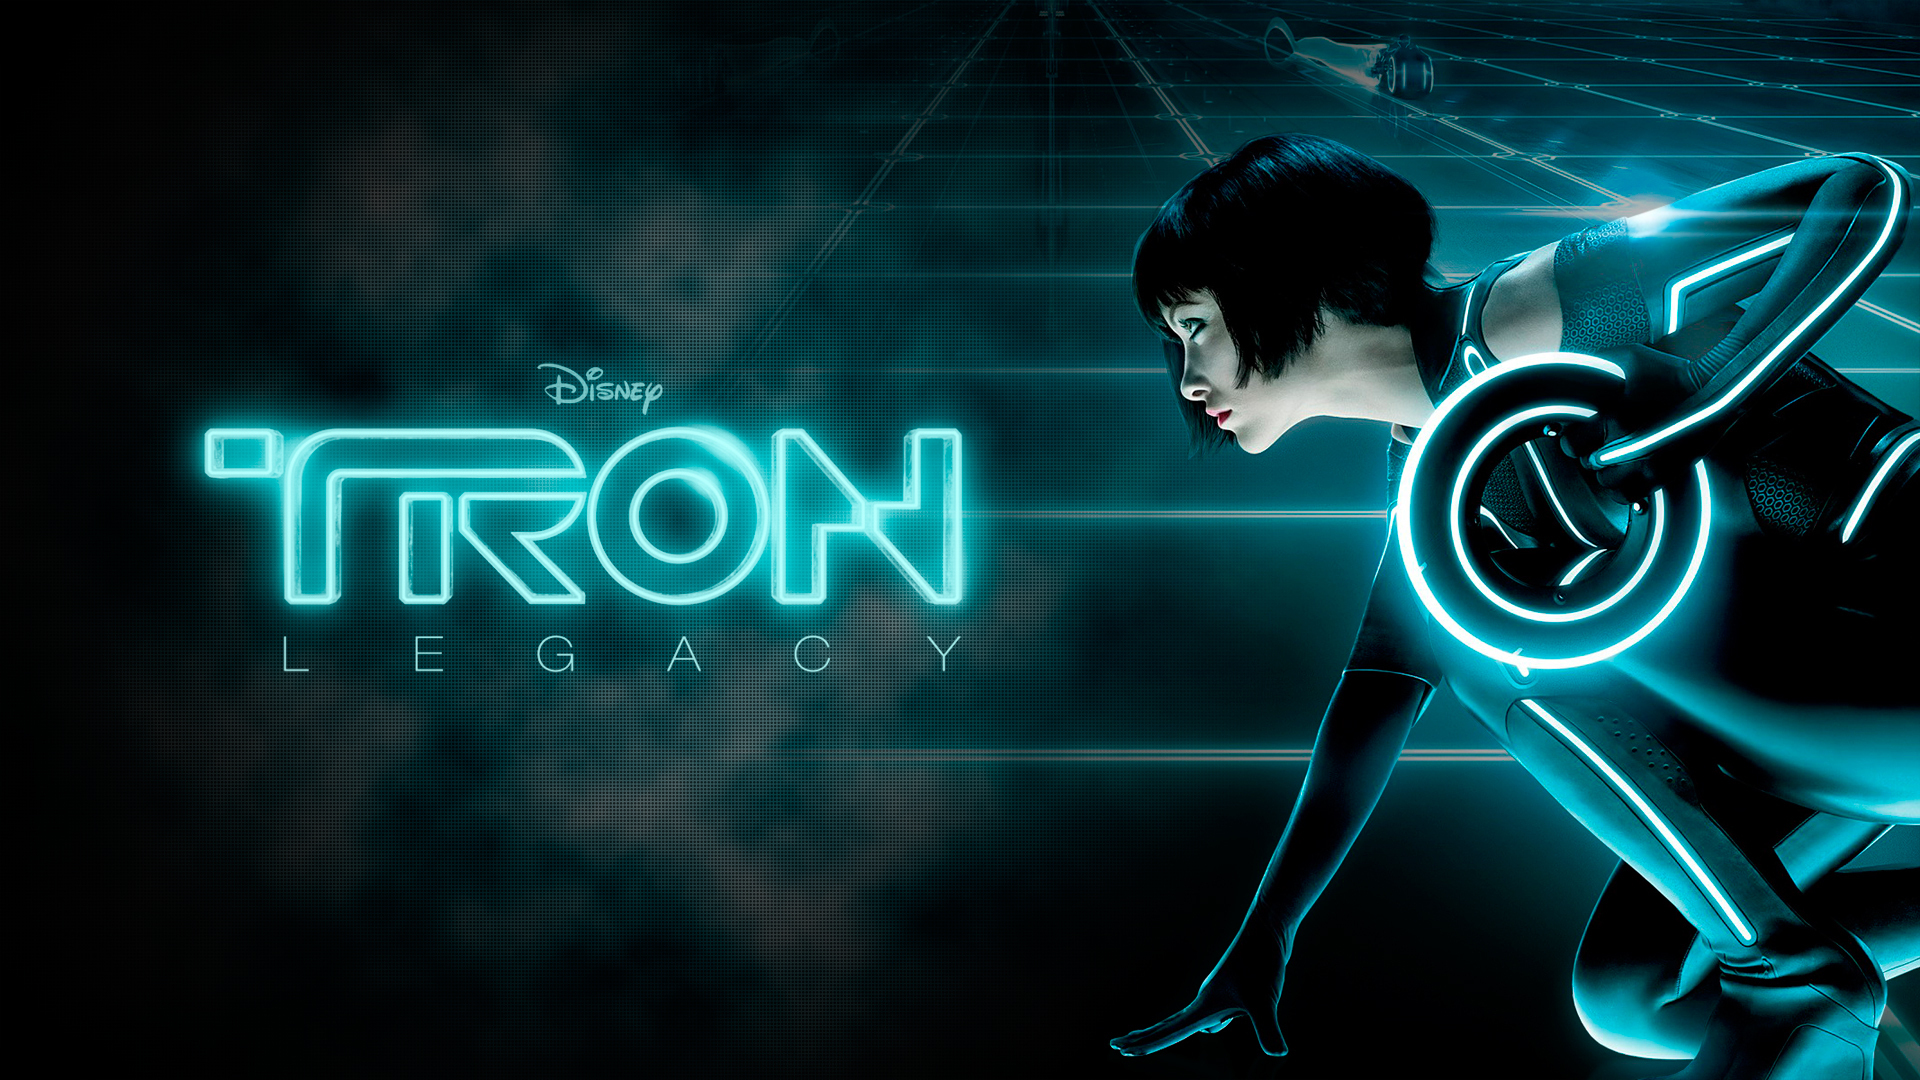 Tron Legacy Sequel to be Filmed in Vancouver This October